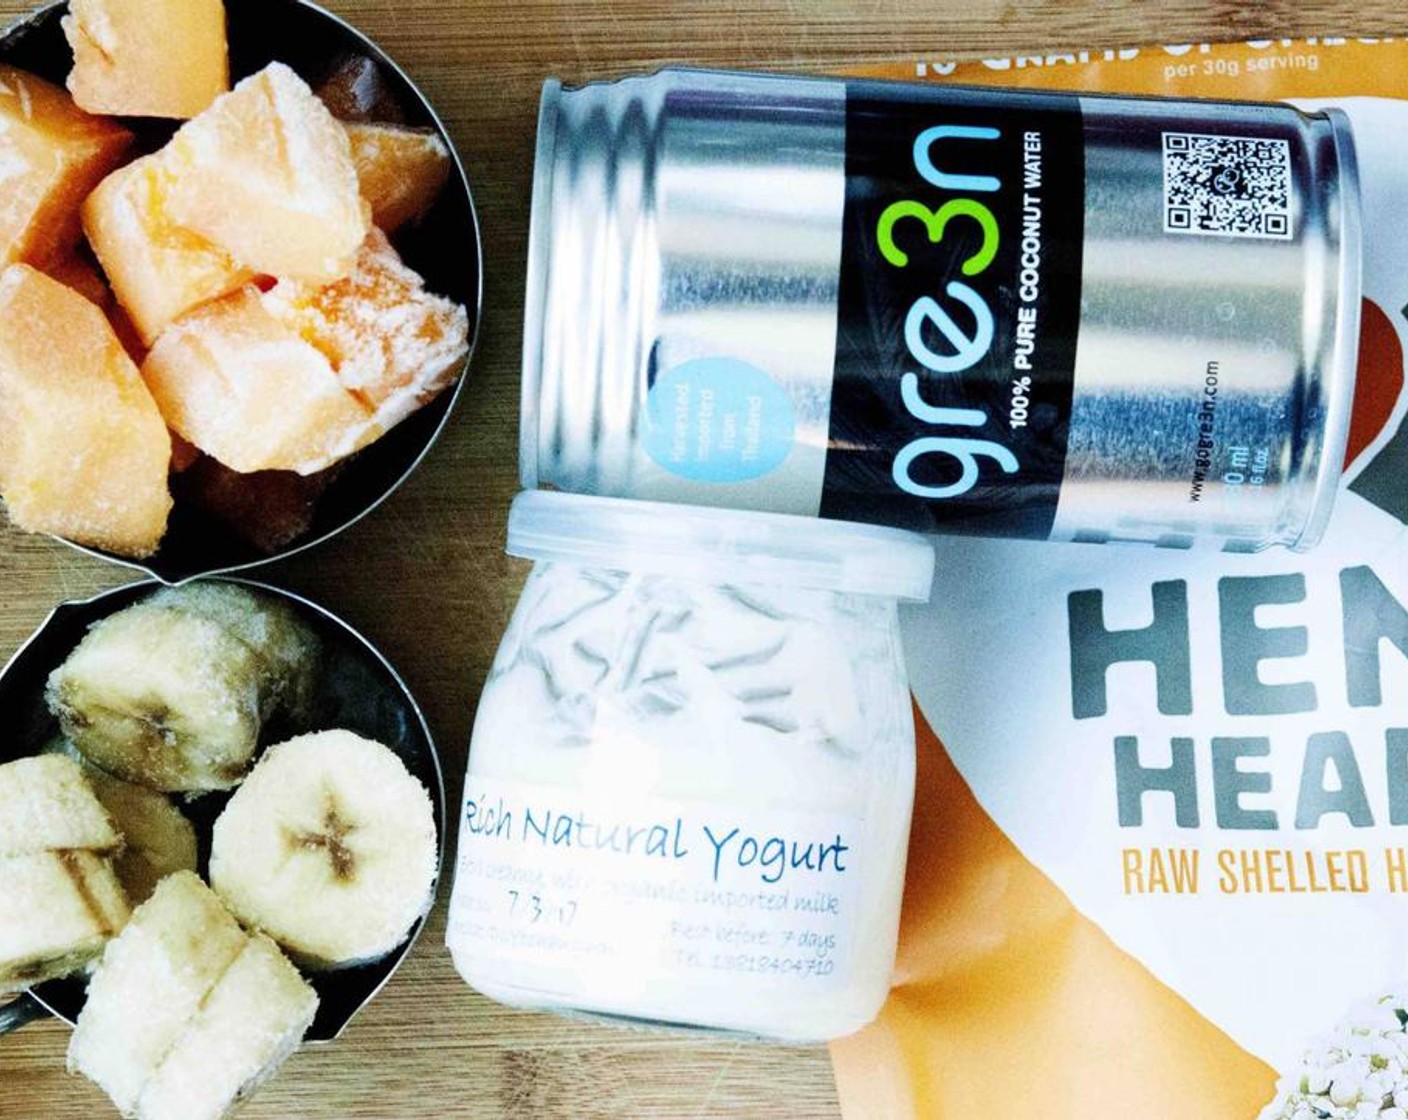 step 2 Place the Coconut Water (10 fl oz), Hemp Hearts (1 Tbsp), Yogurt (1/2 cup), papaya, banana, and Ice (1/2 cup) into a blender and process until smooth and creamy.